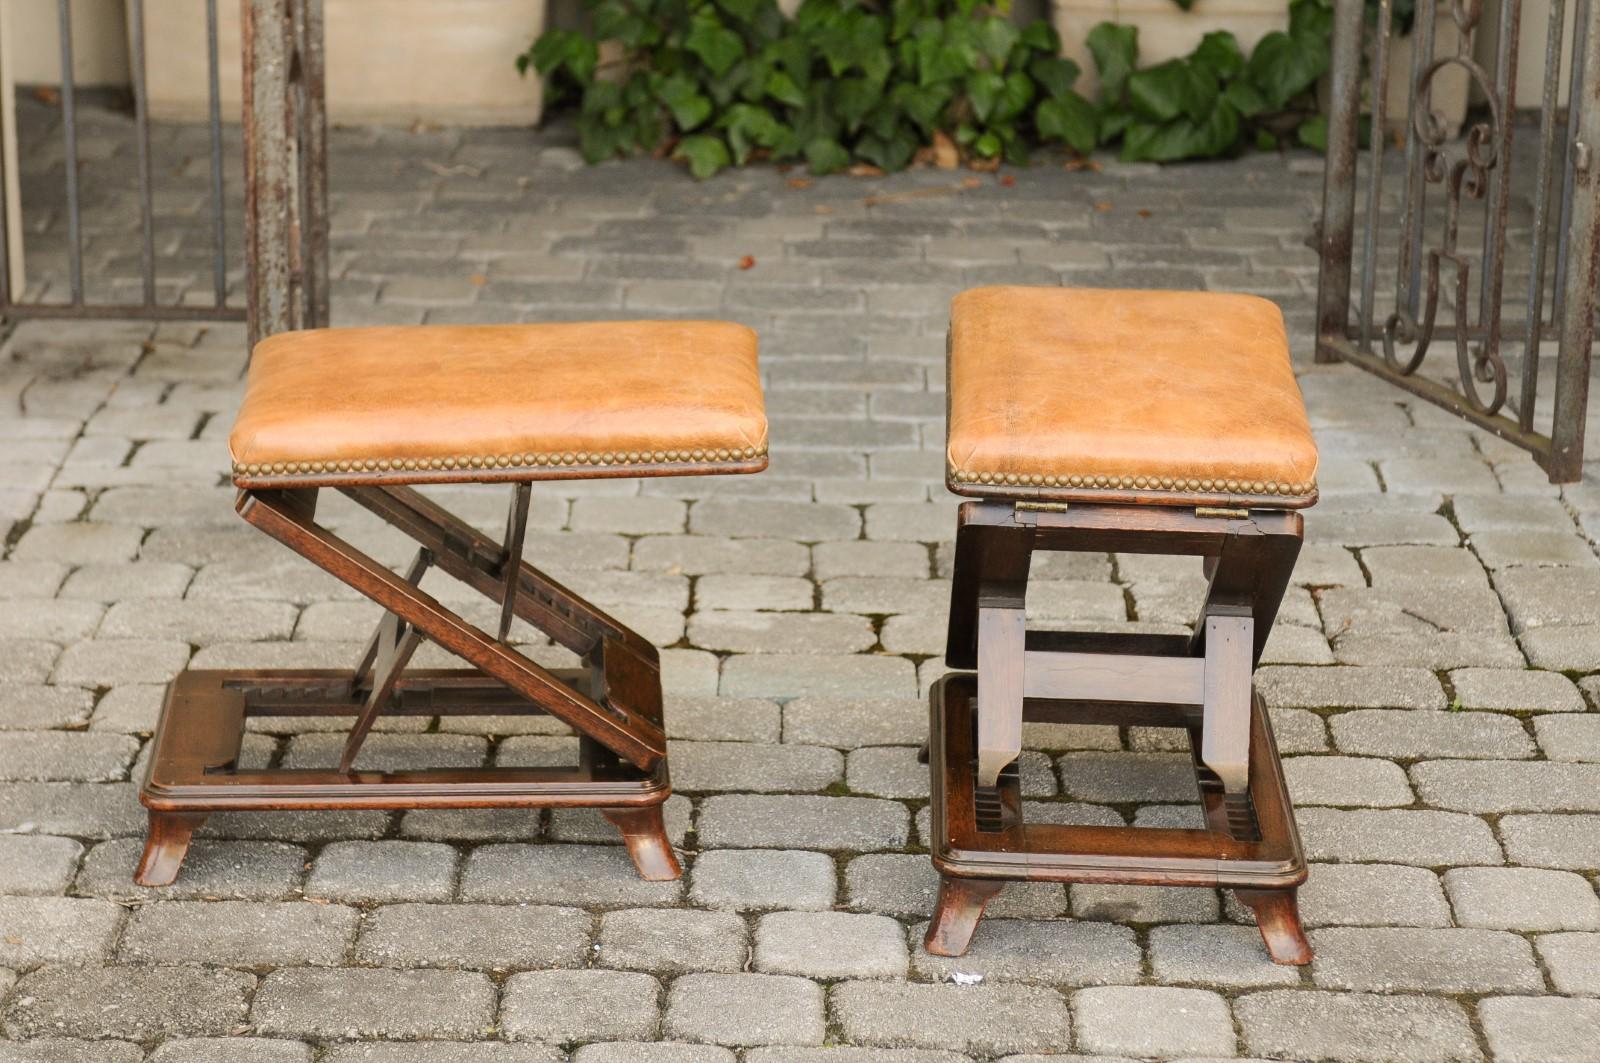 A pair of English wooden metamorphic footstools from the mid-19th century, with caramel leather tops. Born in England during the third quarter of the 19th century, each of this amazing metamorphic stools features a caramel colored leather top,